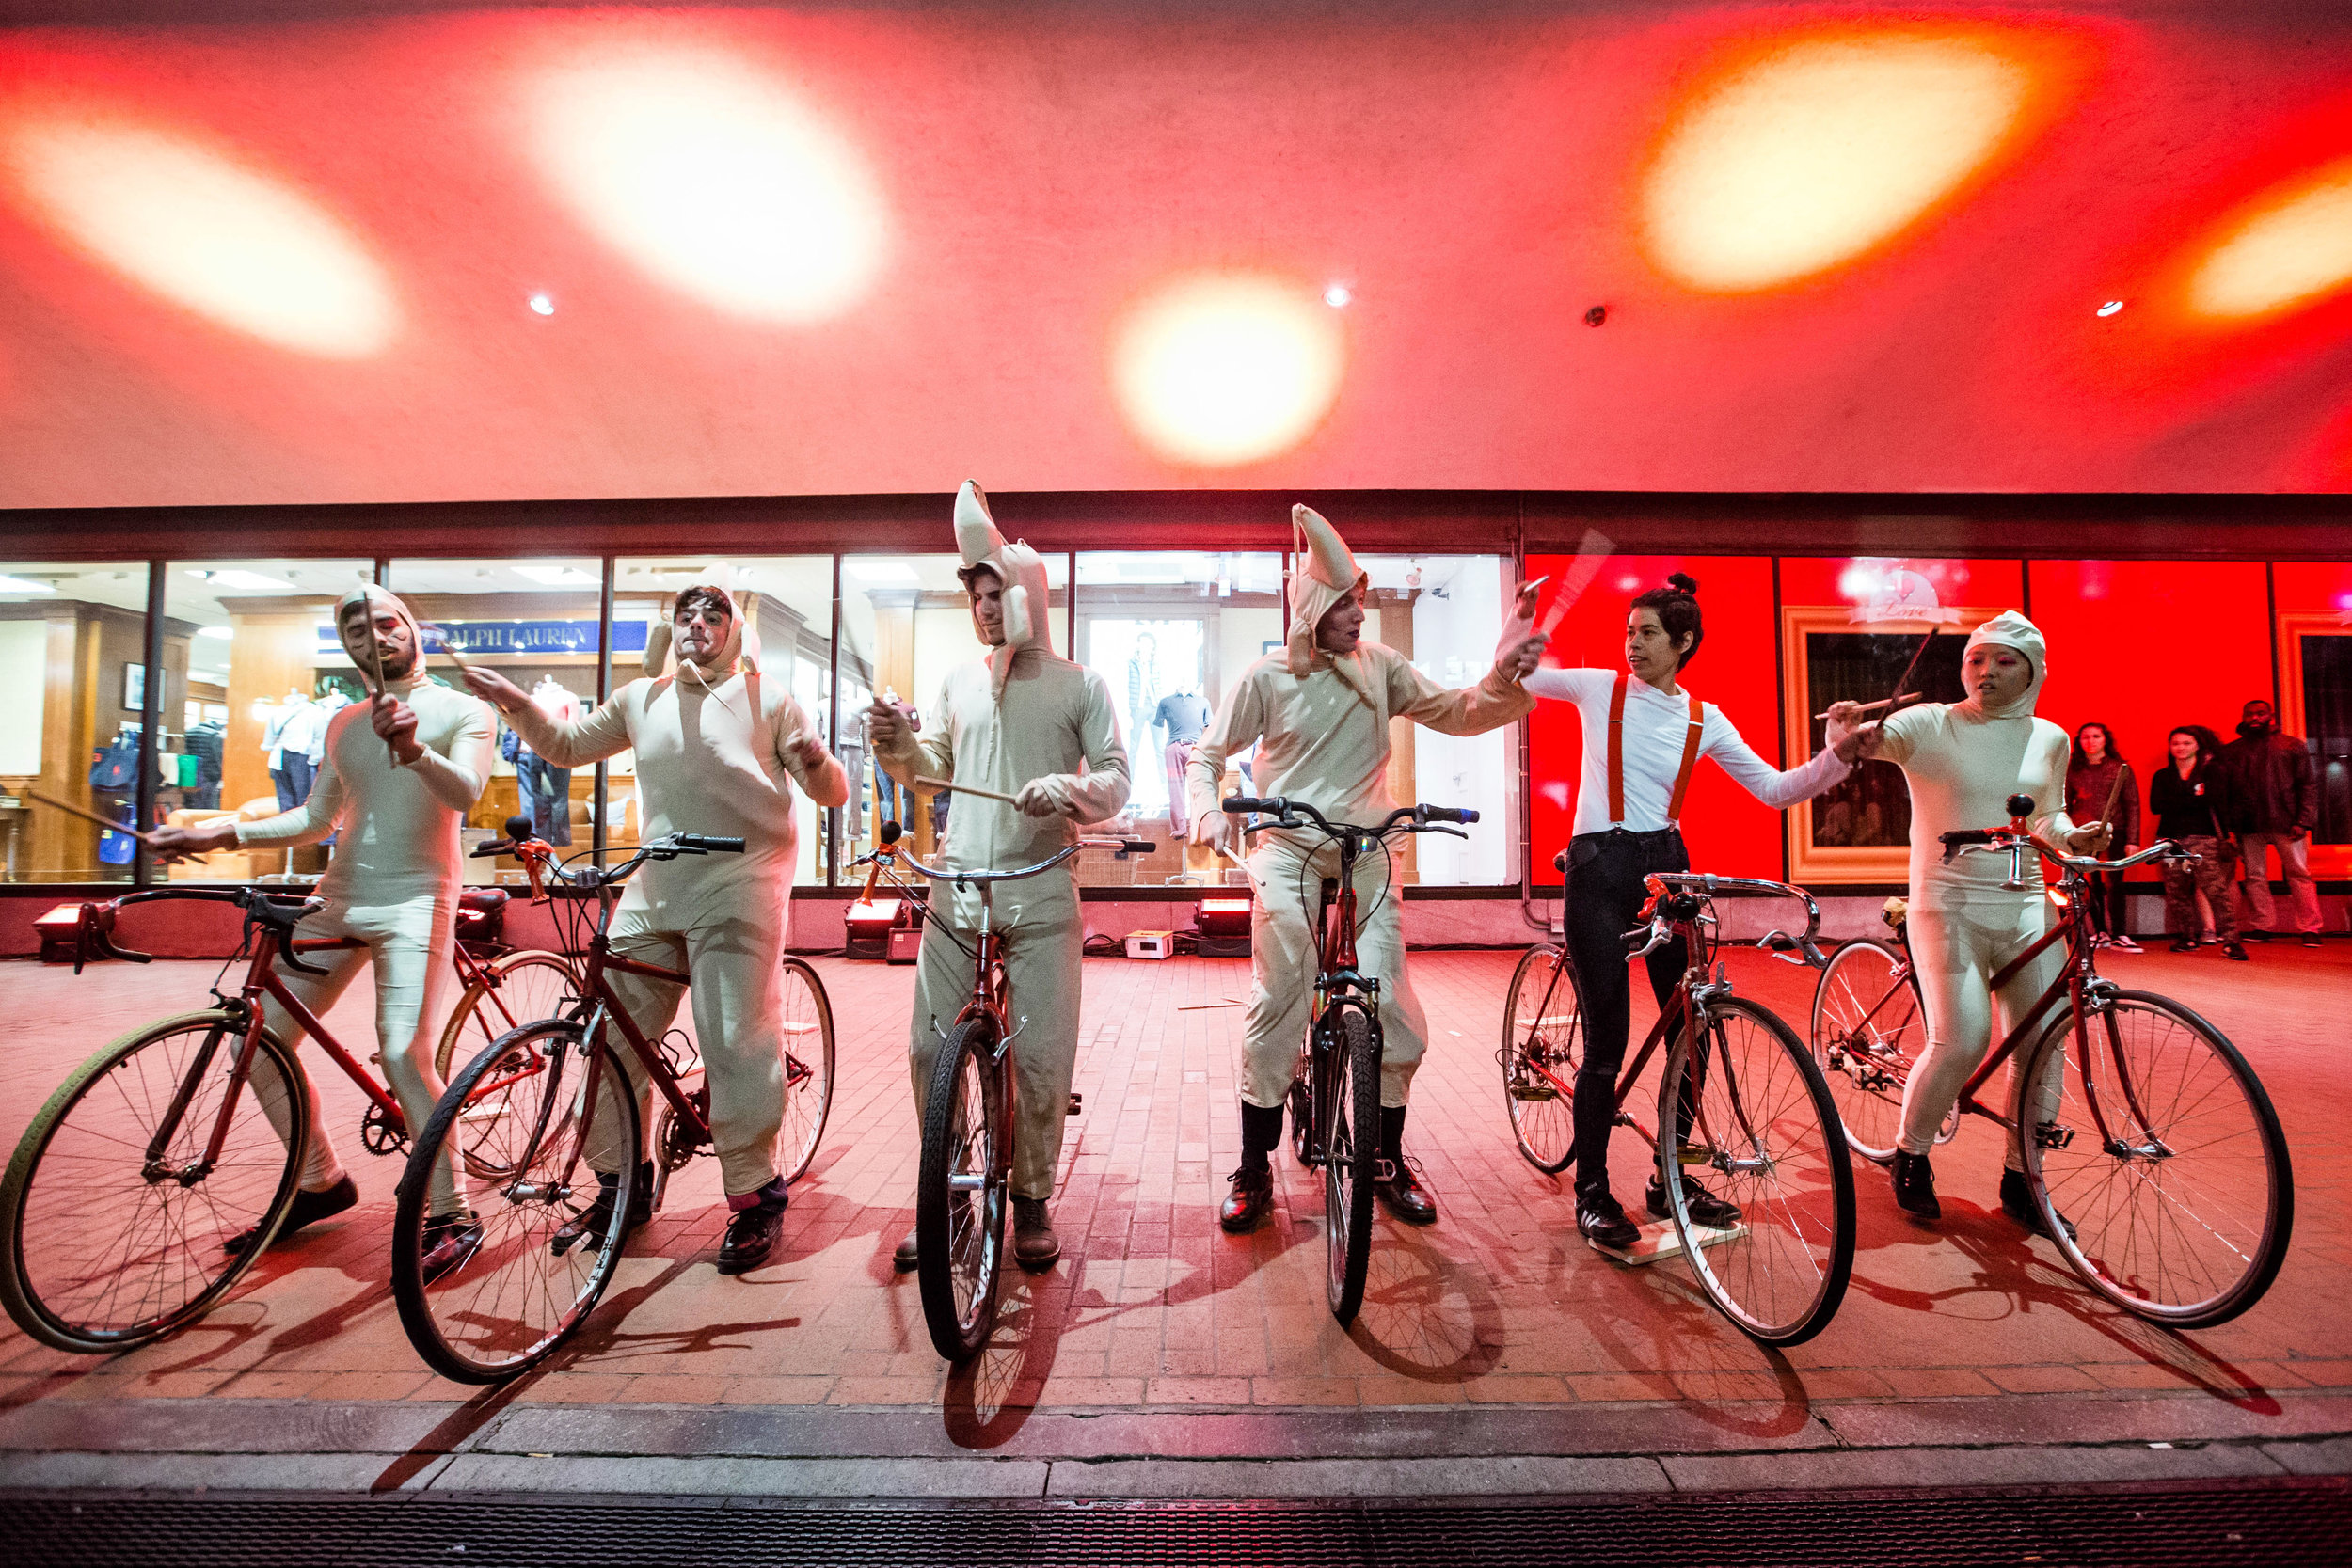 a group of people wearing light clothing and holding drumsticks while sitting on bicycles